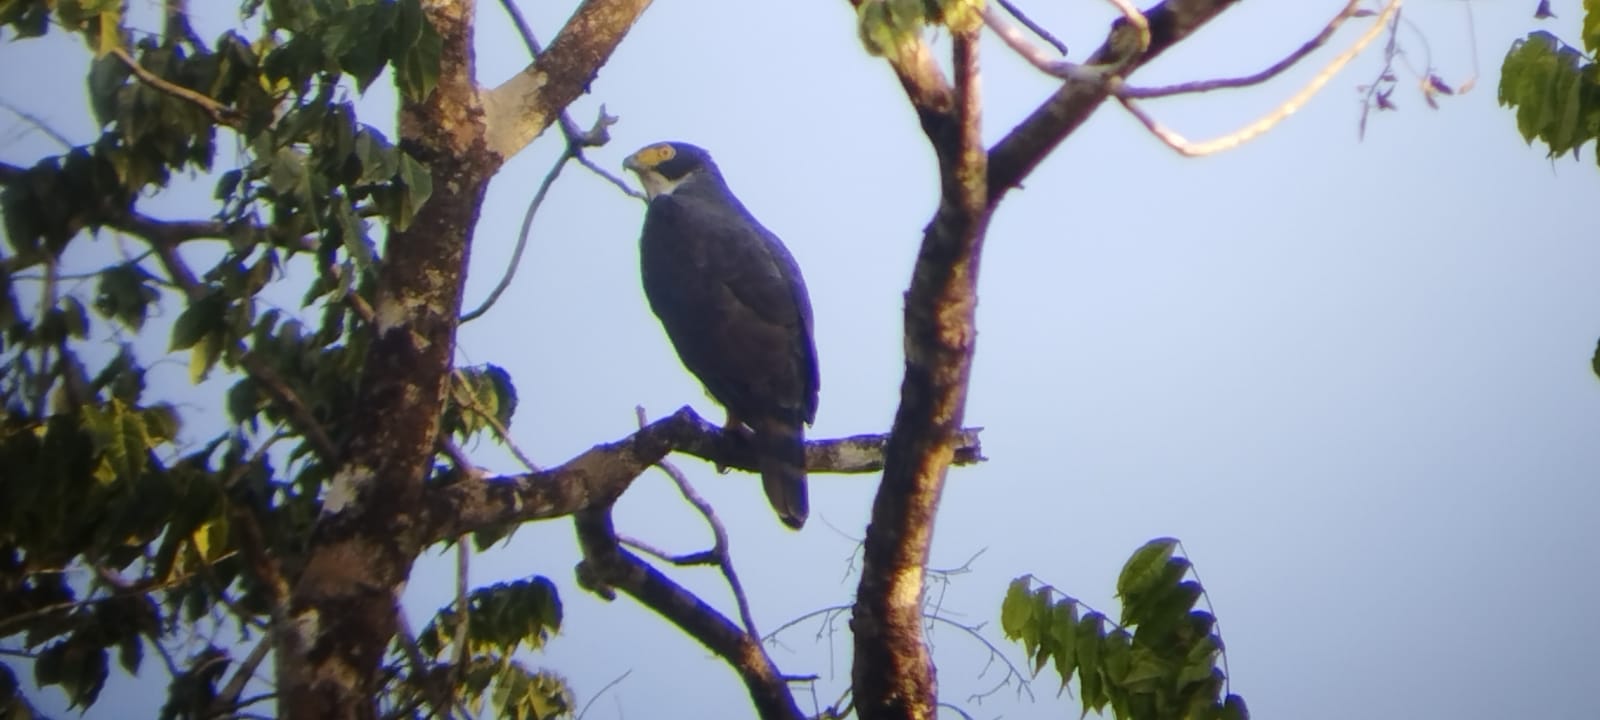 Accipiter poliogaster, Gray-bellied Hawk,  door Fred Pansa,, ecotours